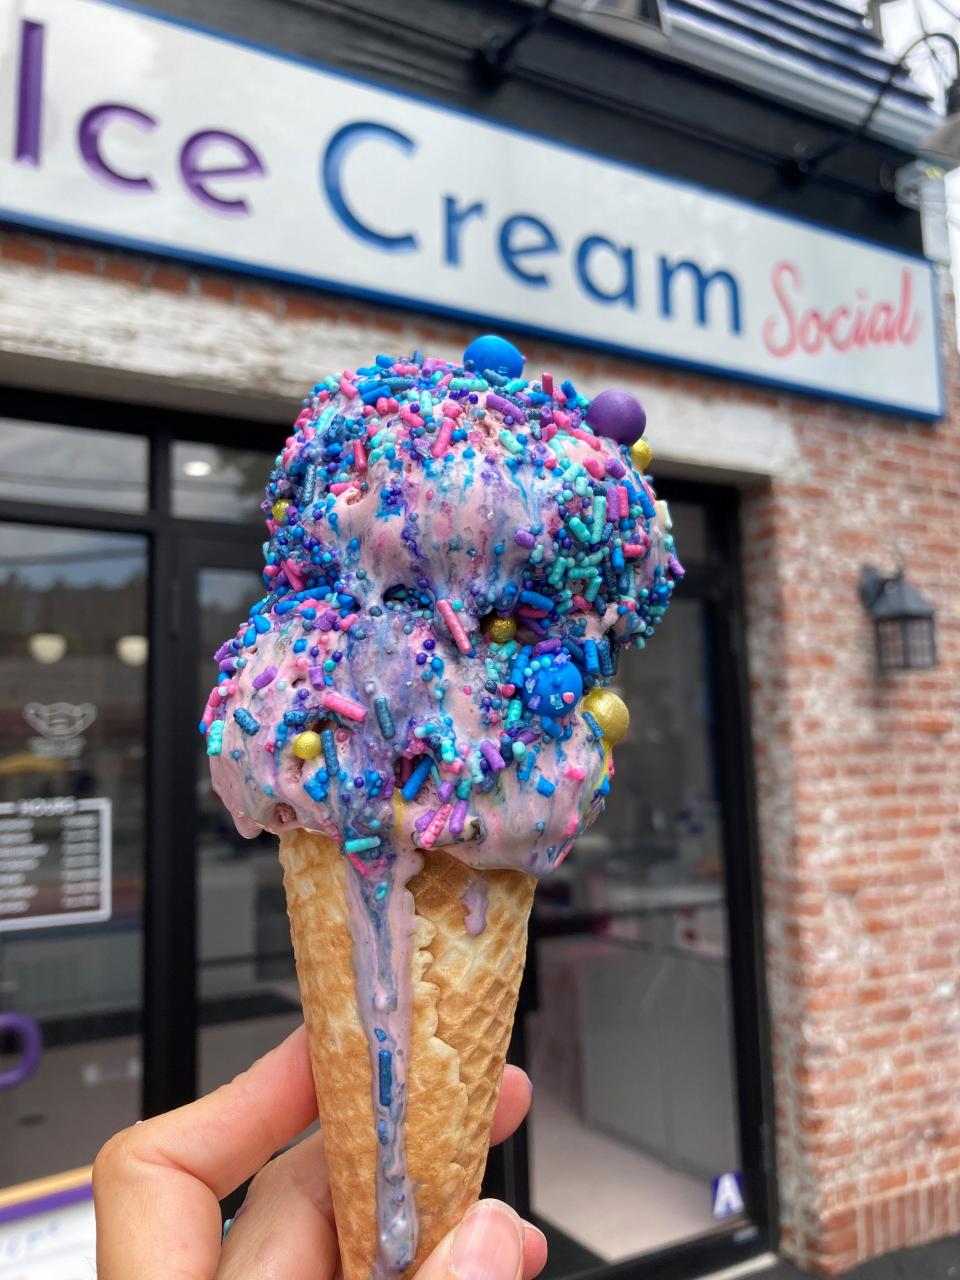 Black raspberry chip with signature sprinkles at Ice Cream Social in White Plains. The ice cream shop, owned by two White Plains natives, opened July 5, 2021. Photographed July 14, 2021.